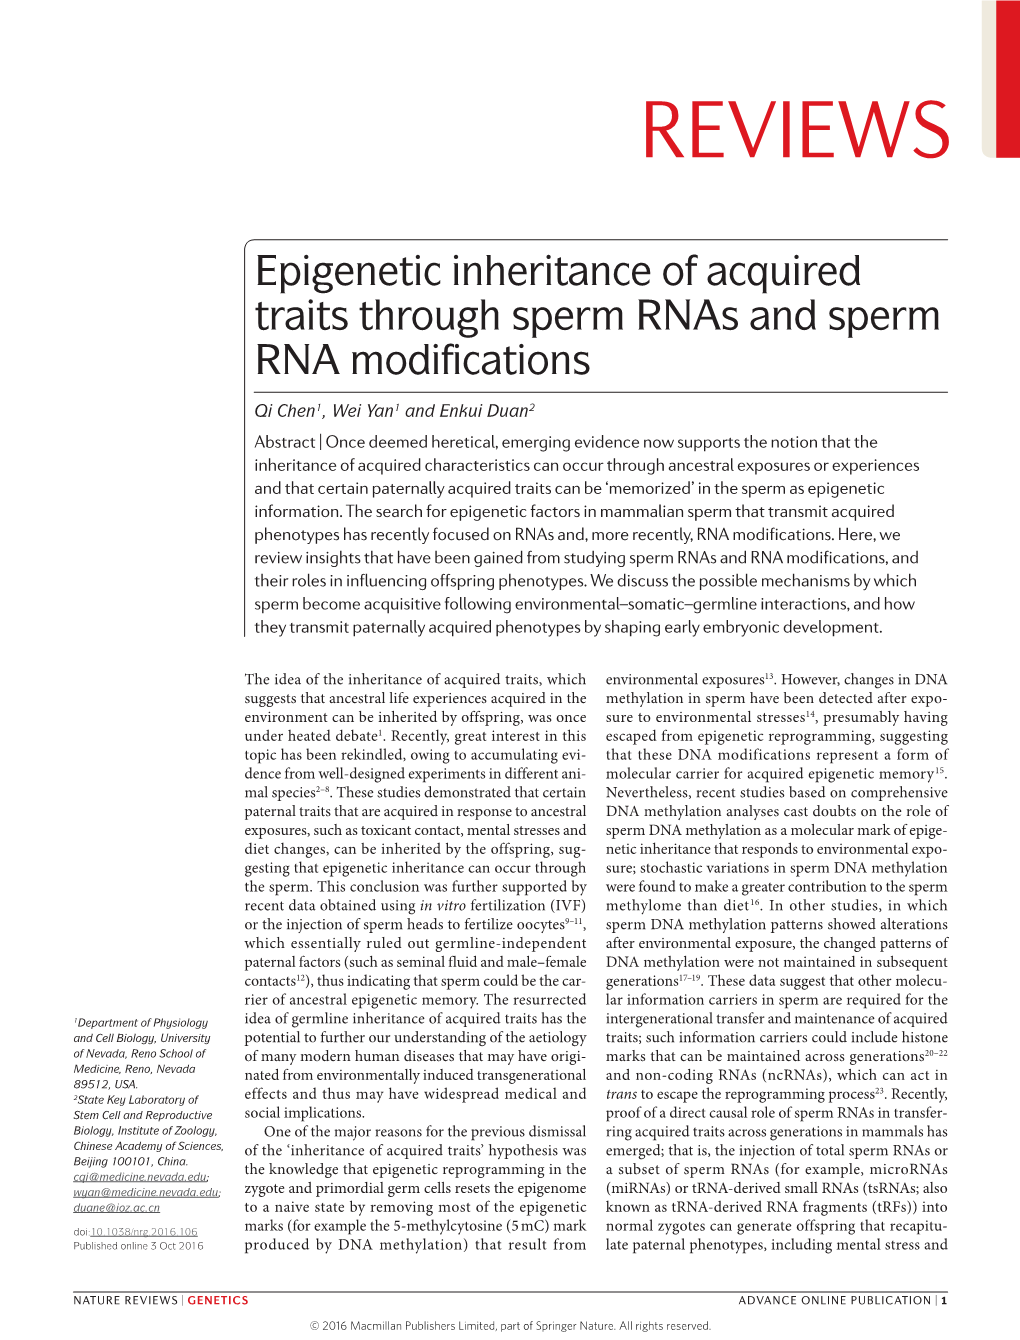 Epigenetic Inheritance of Acquired Traits Through Sperm Rnas and Sperm RNA Modifications